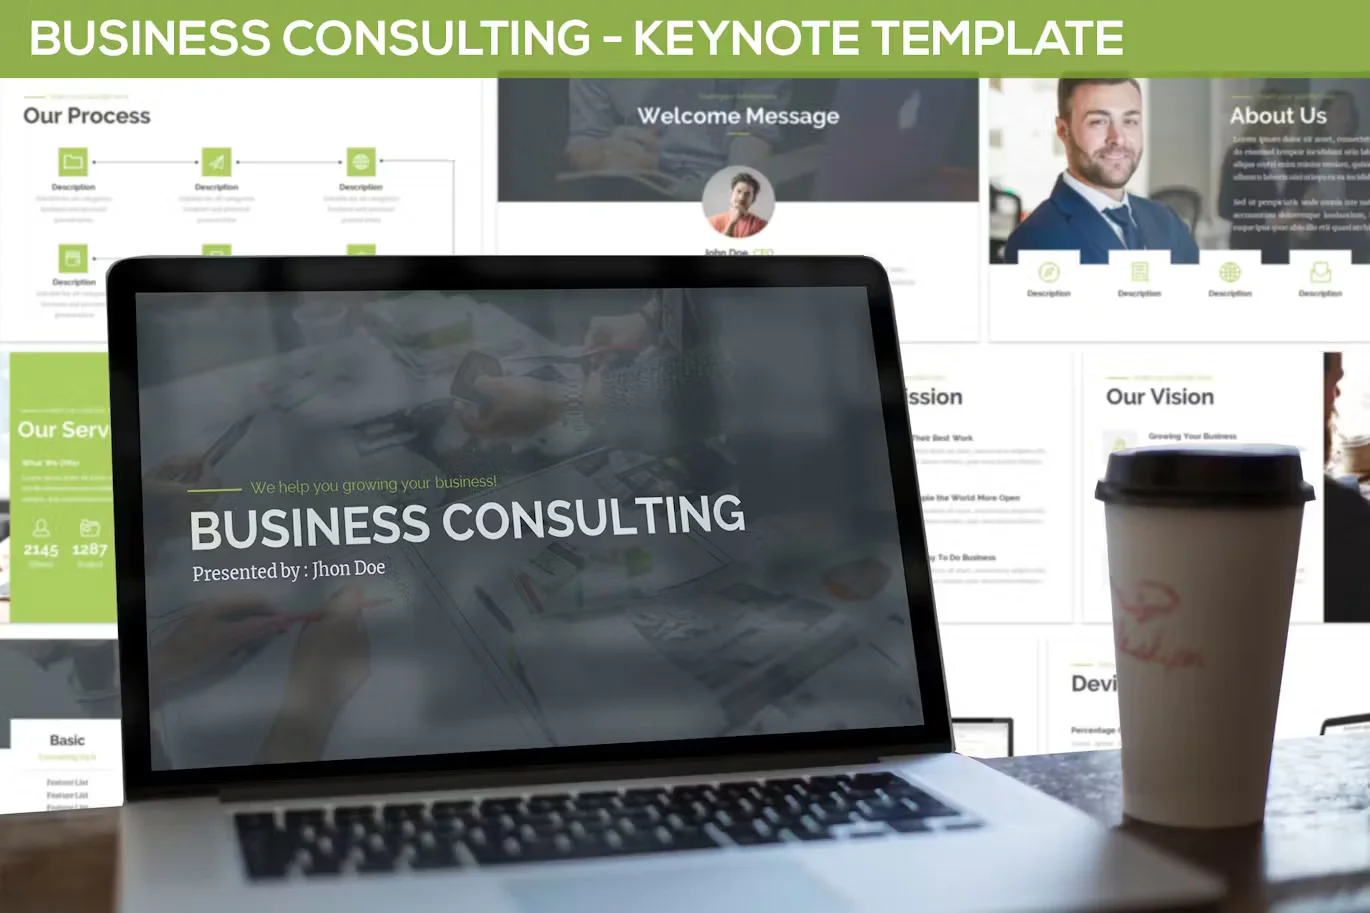 Business Consulting - Keynote Template